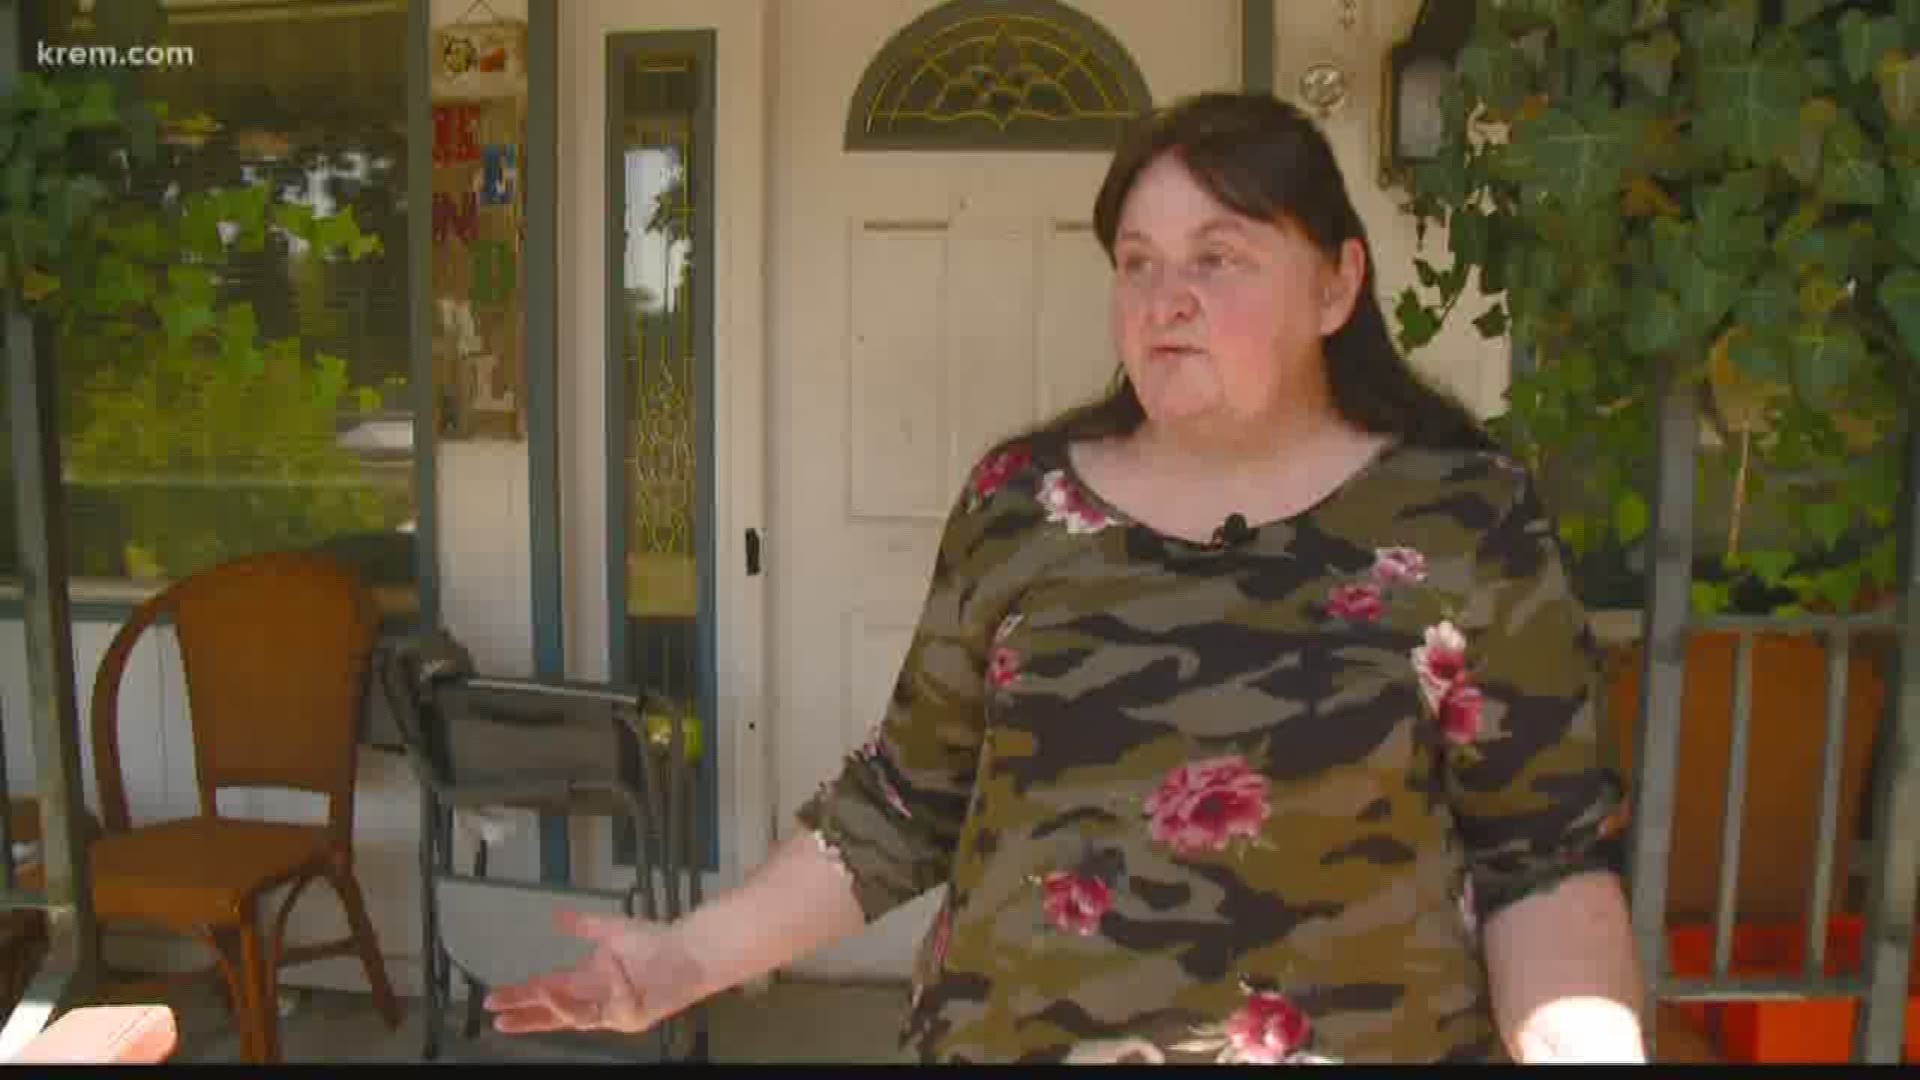 KREM's Shayna Waltower spoke with Hillyard residents in Spokane about being without drinkable water from their faucets since Friday.